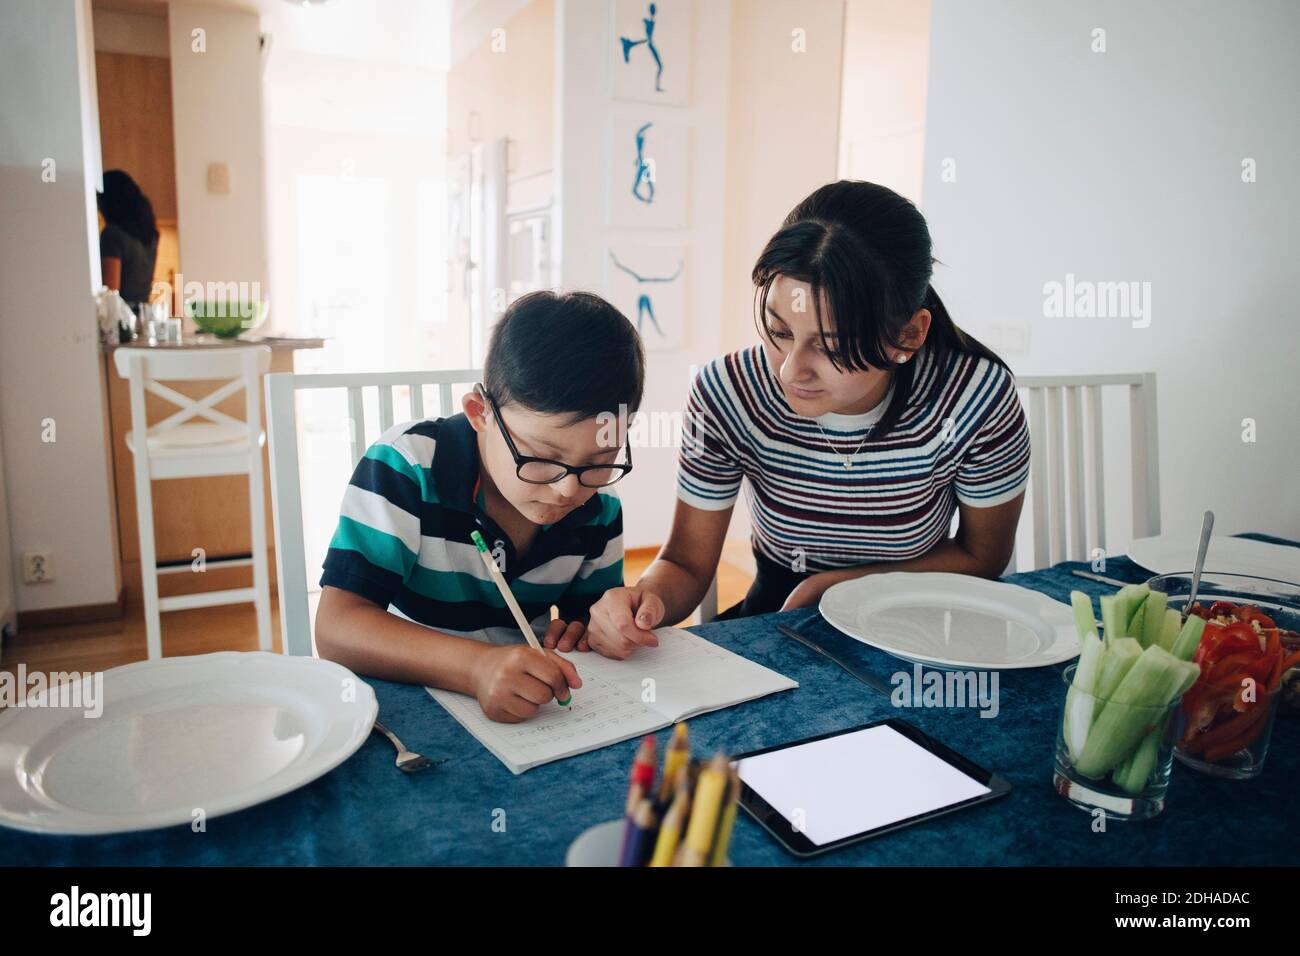 Teenage girl assisting brother in homework at dining table Stock Photo